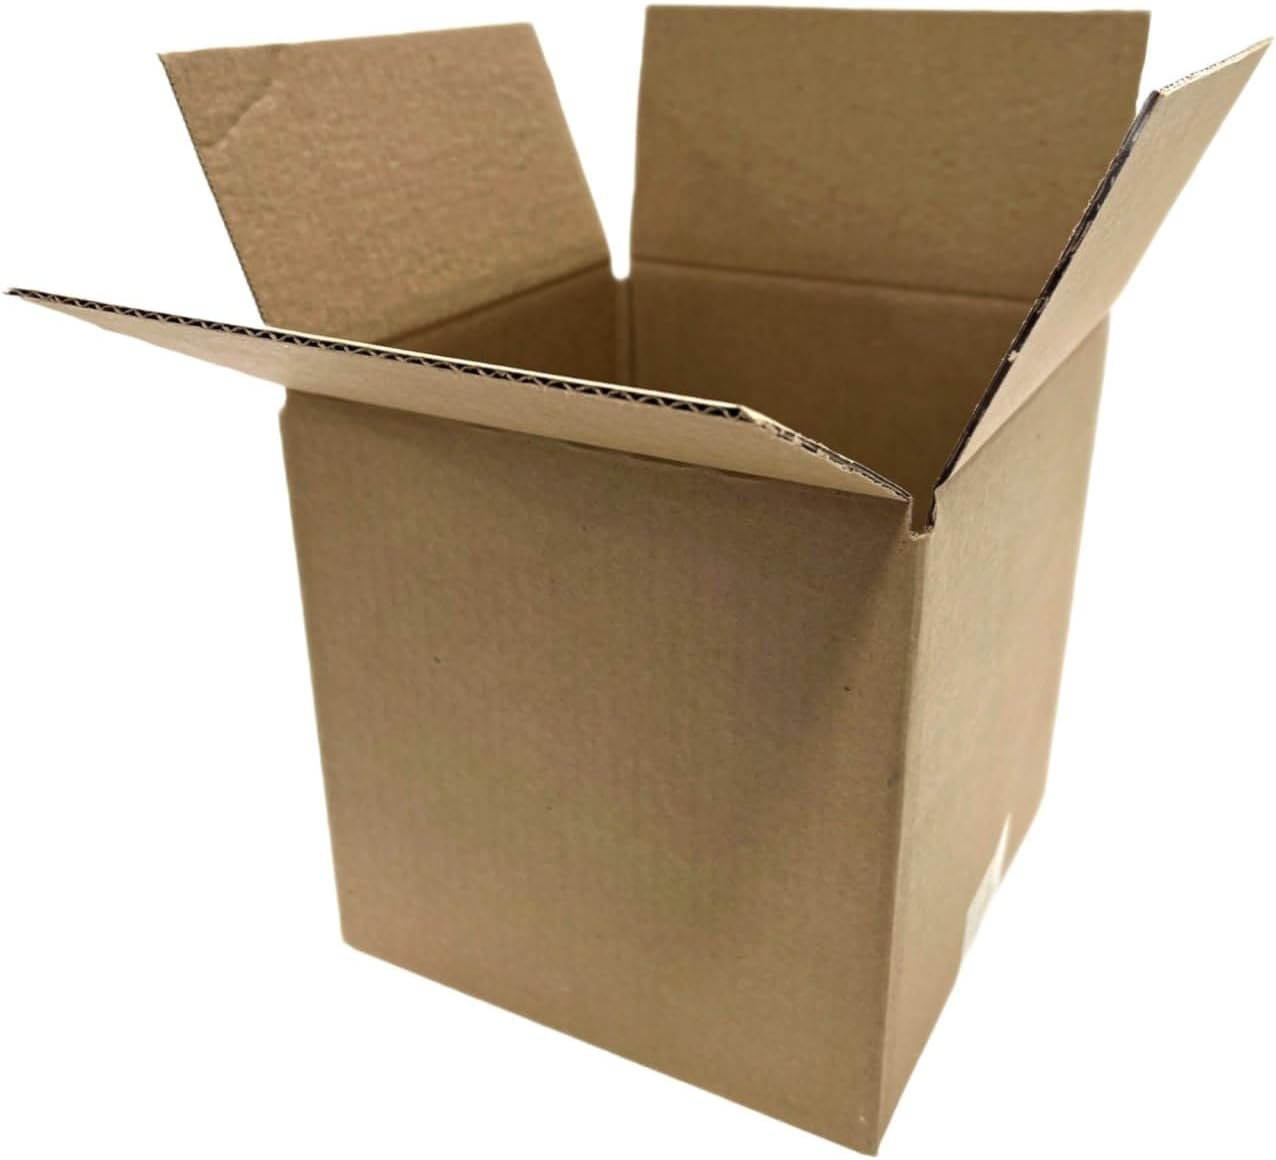 25 10x10x10 Cardboard Paper Boxes Mailing Packing Shipping Box Corrugated